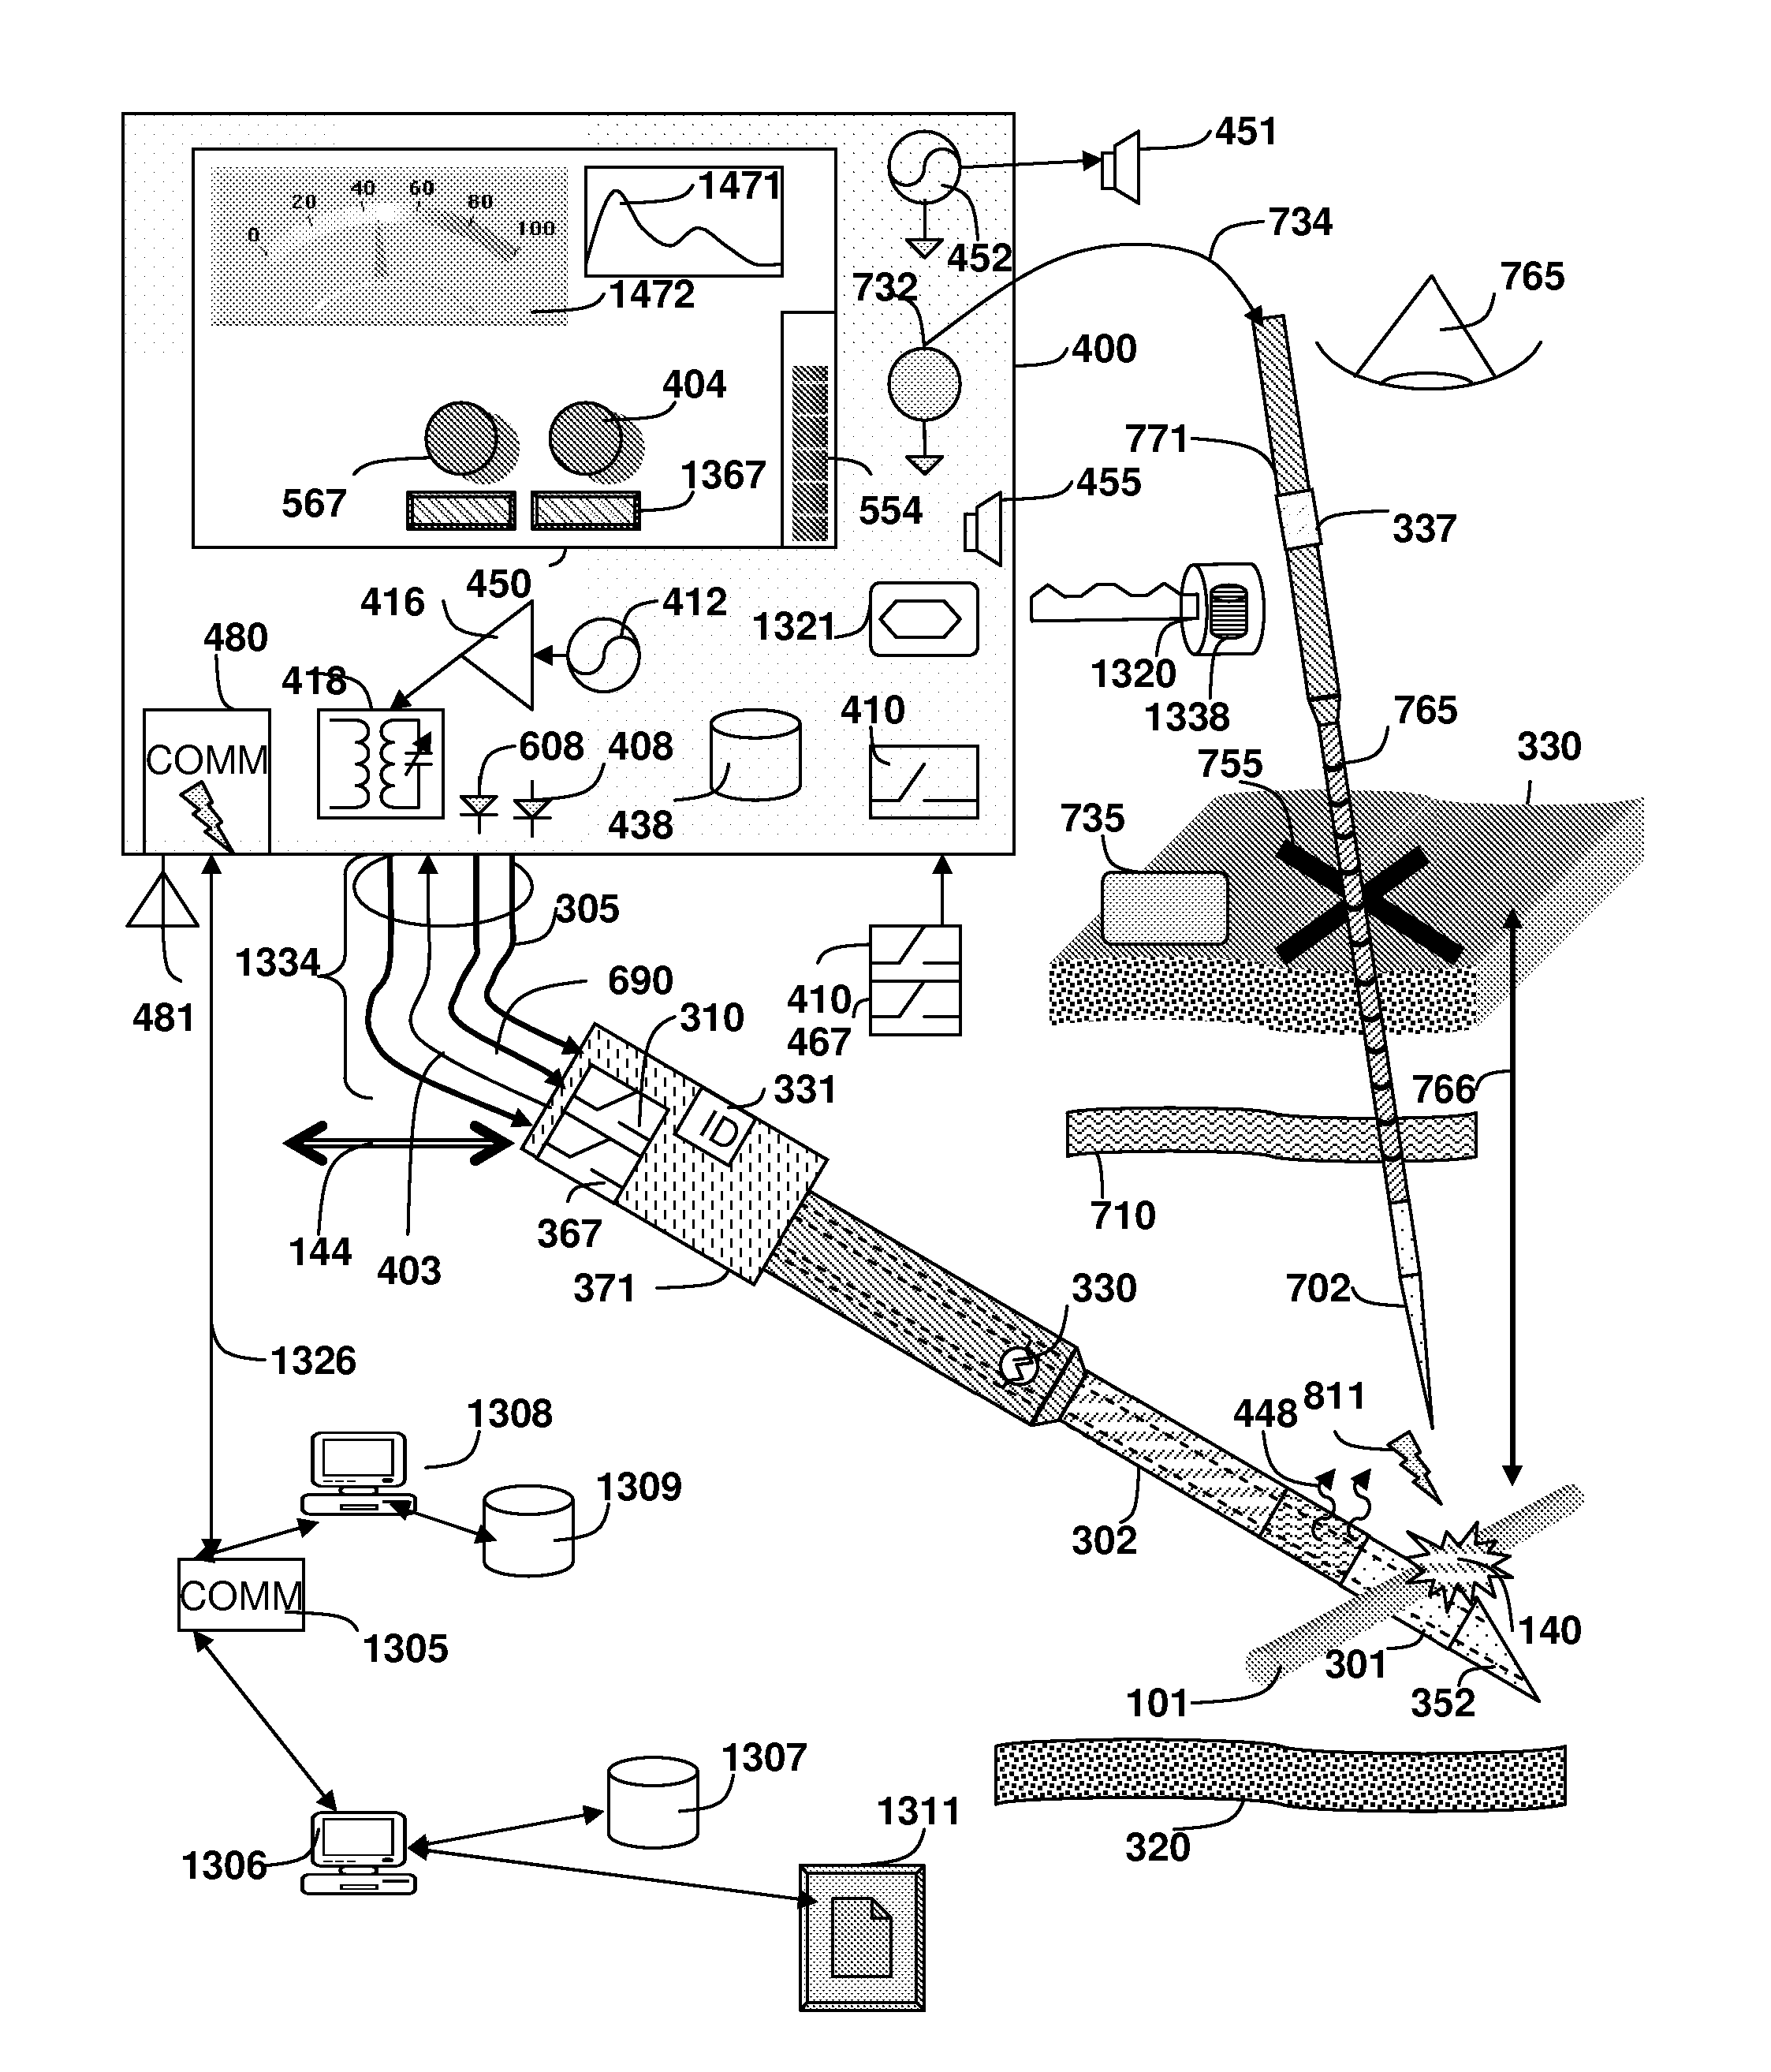 Ablation apparatus and system to limit nerve conduction